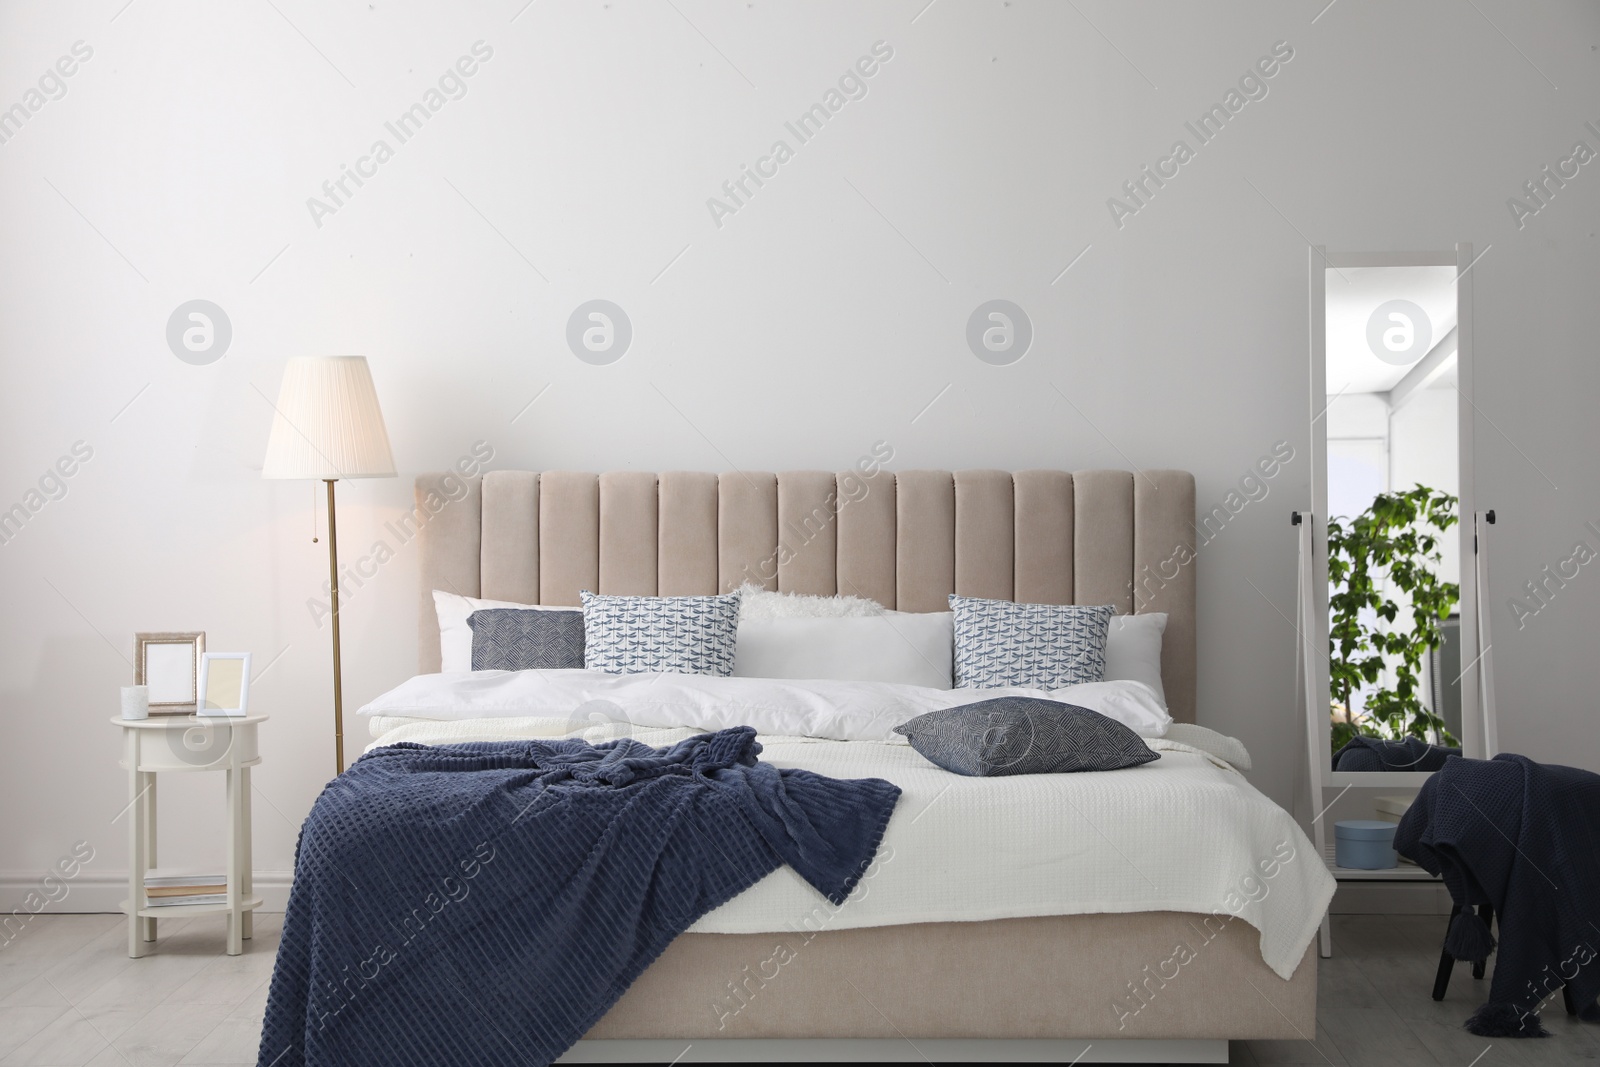 Photo of Comfortable bed with pillows in room. Stylish interior design